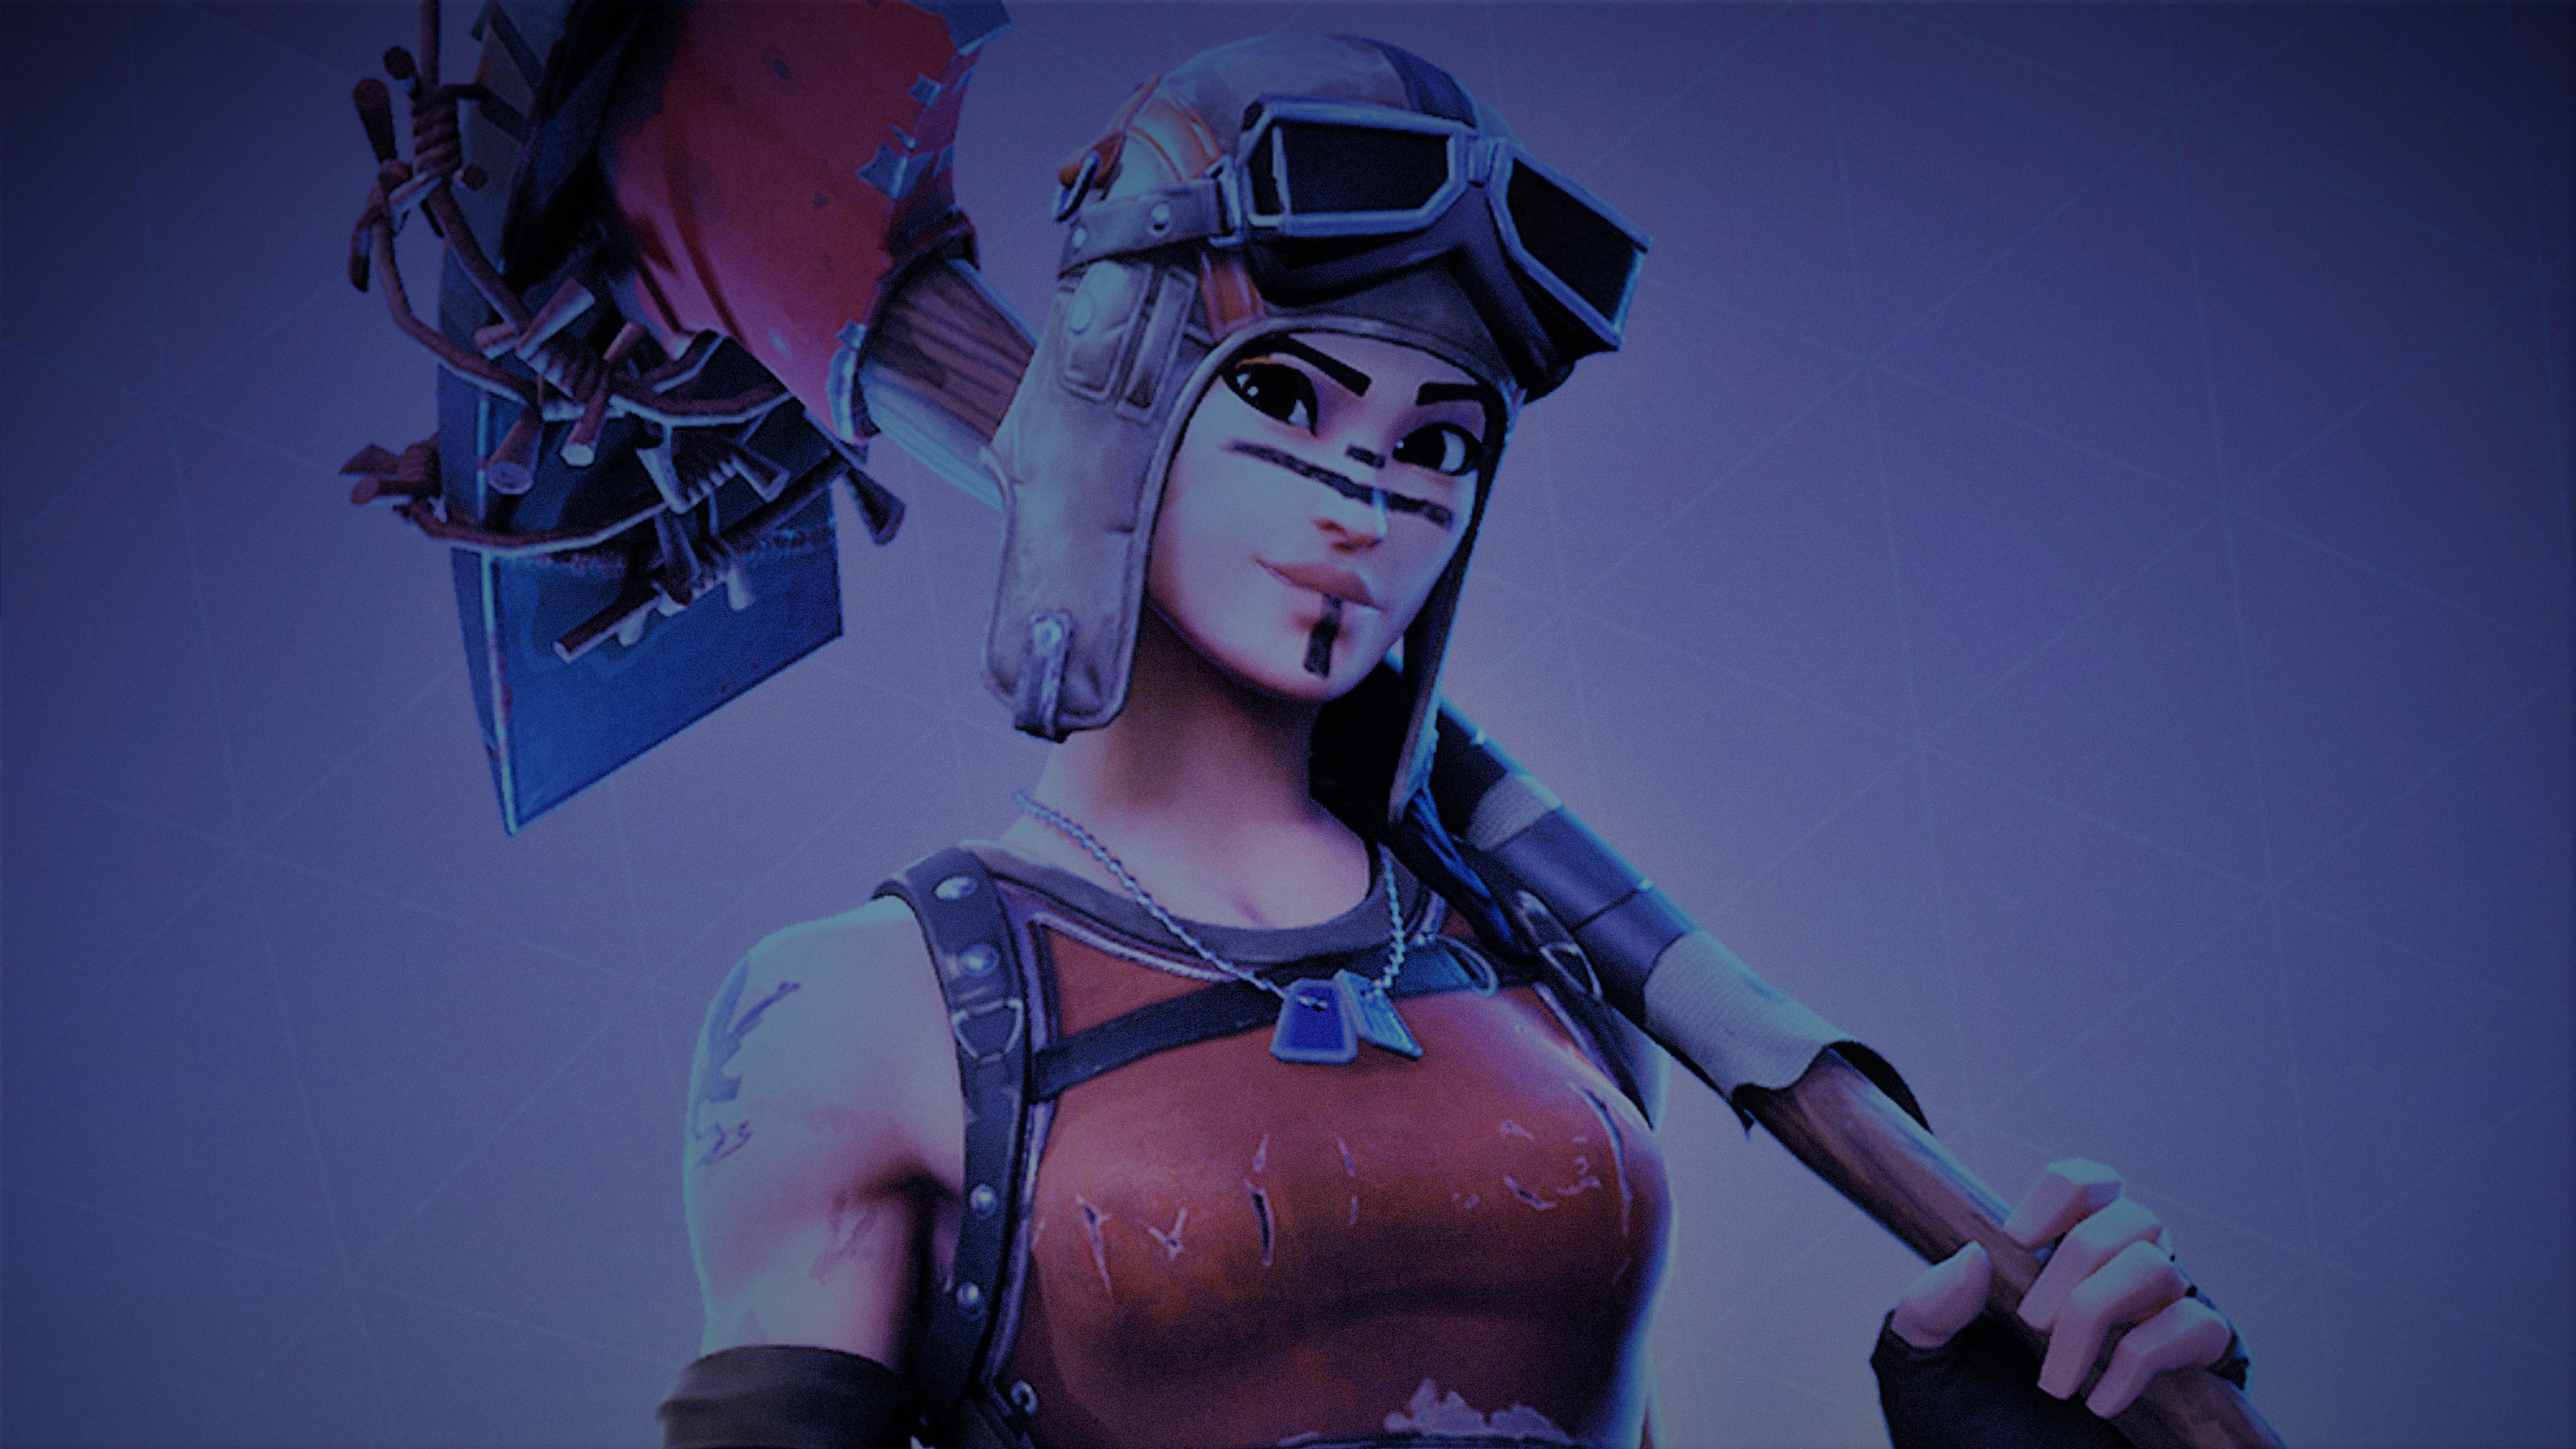 Renegade Raider Fortnite With Pickaxe 4K HD Games Wallpapers.